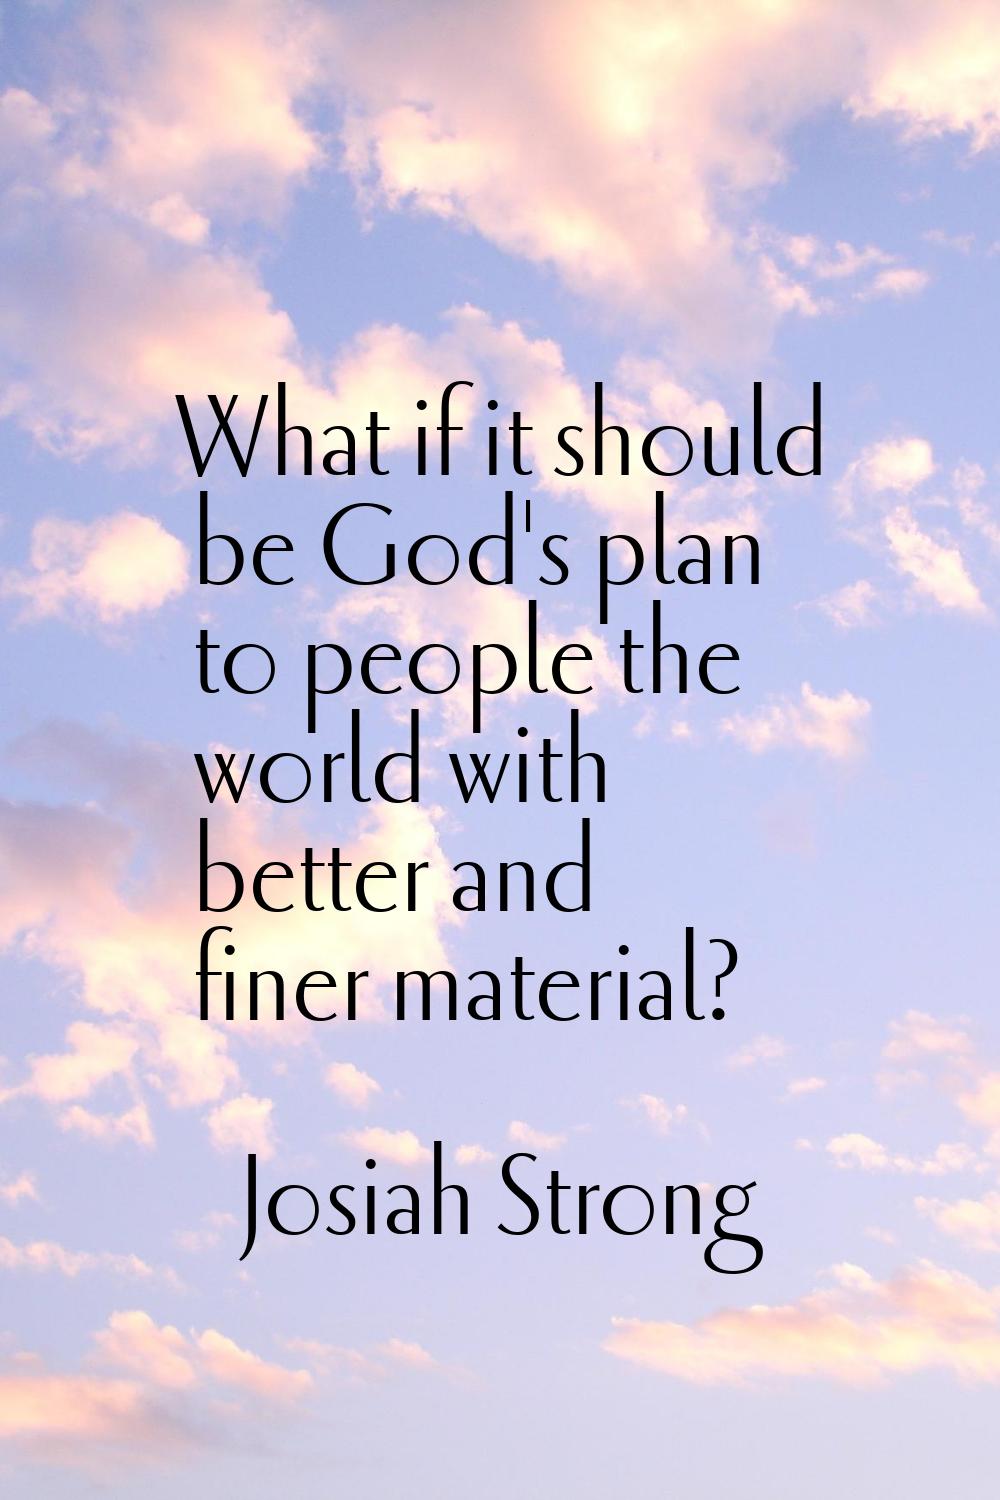 What if it should be God's plan to people the world with better and finer material?